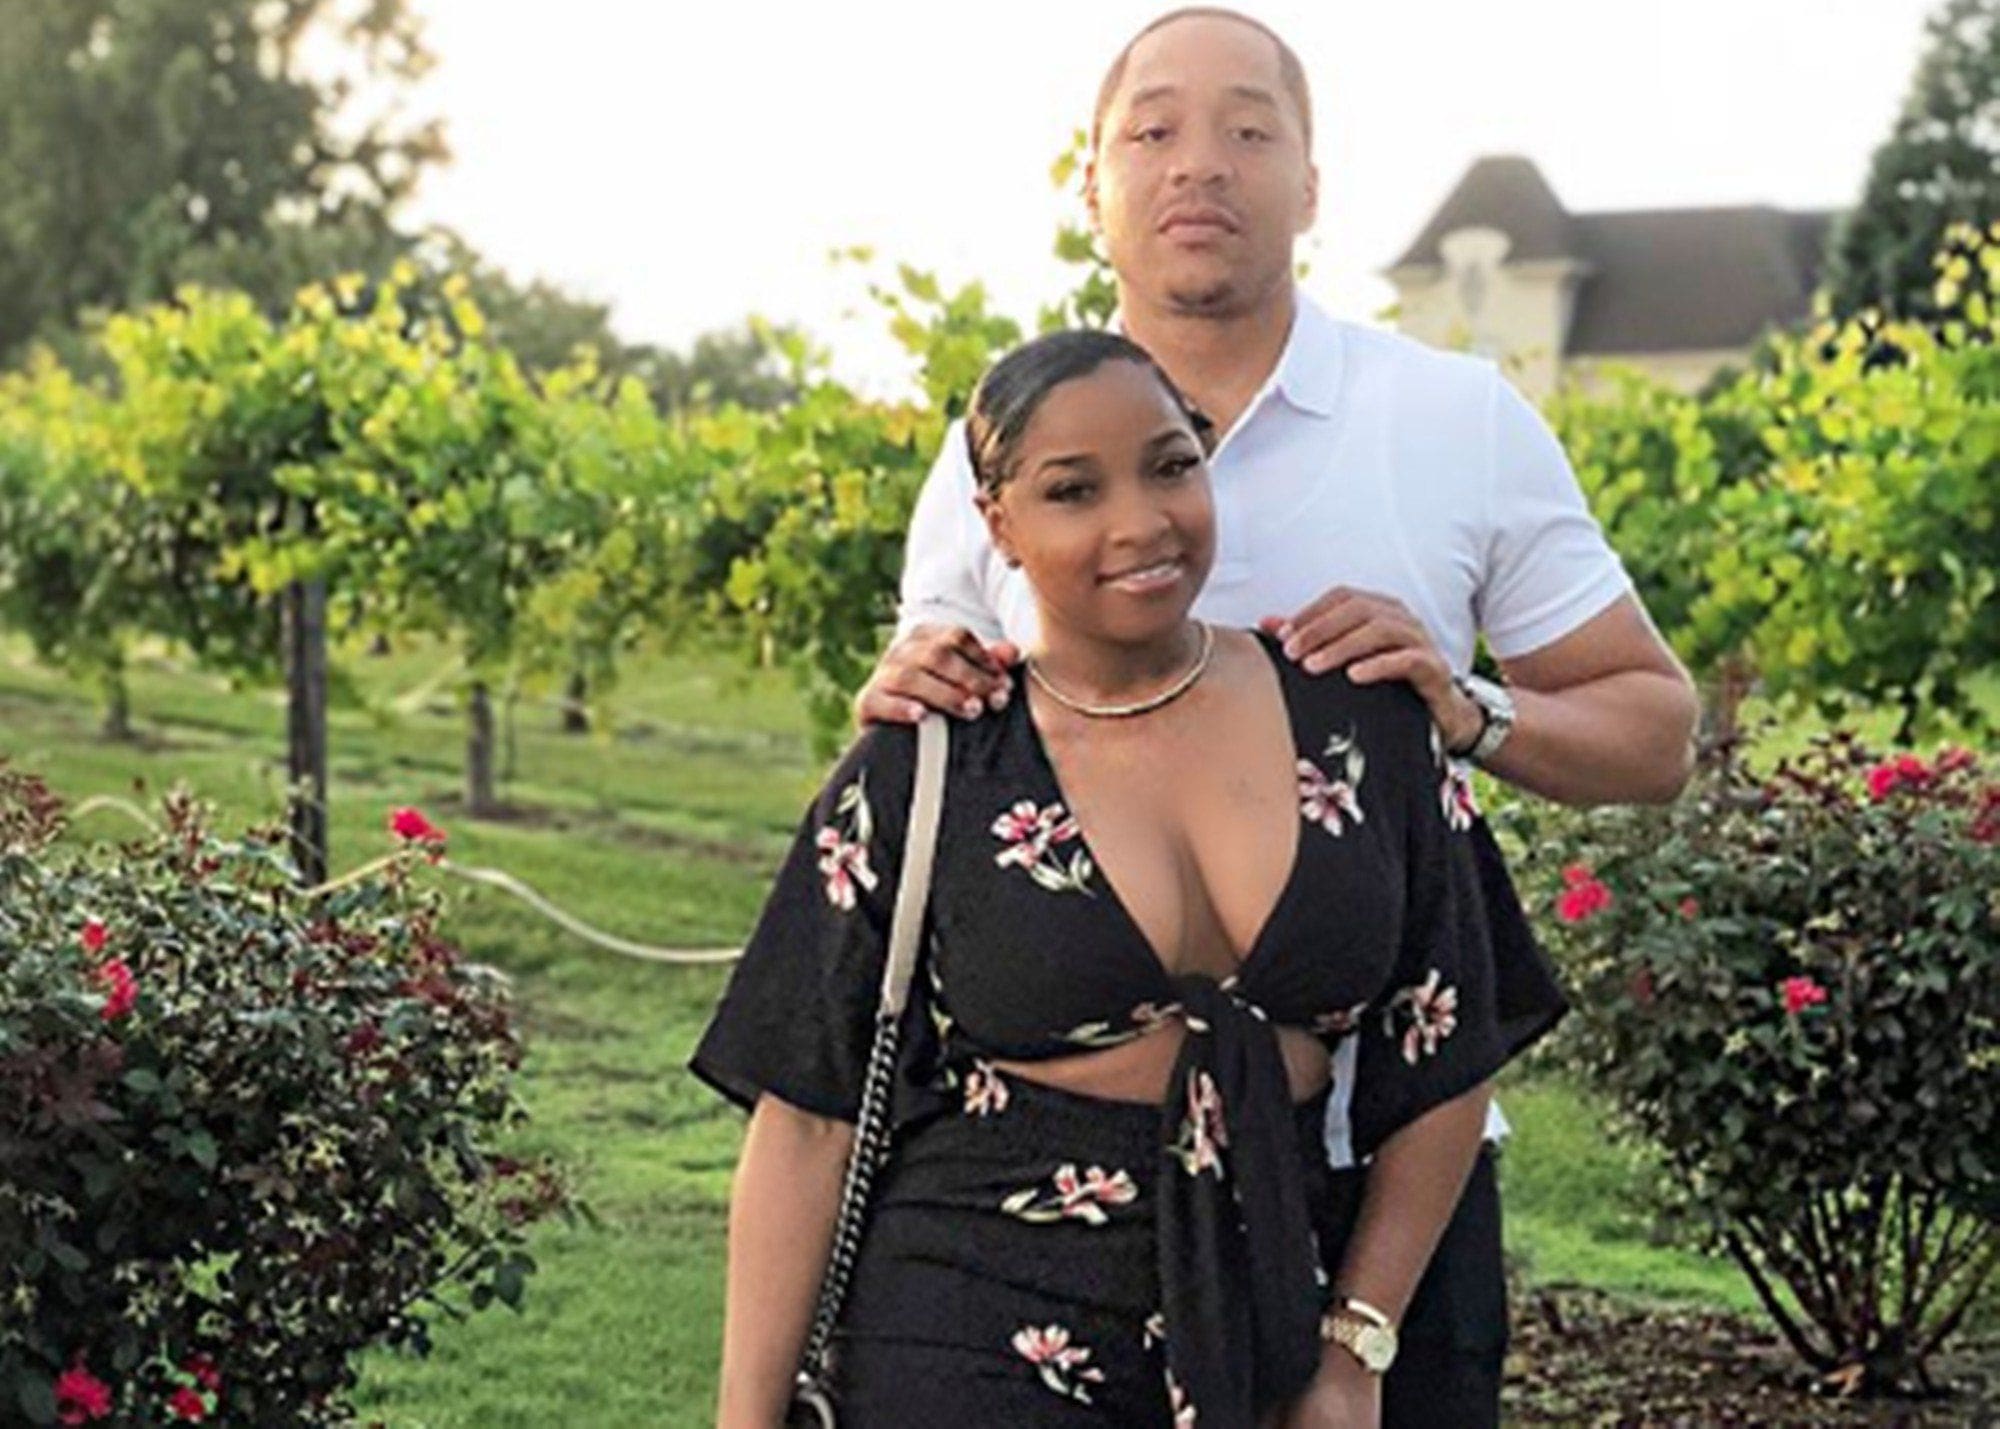 Toya Johnson Impresses Fans With This Video Featuring Robert Rushing